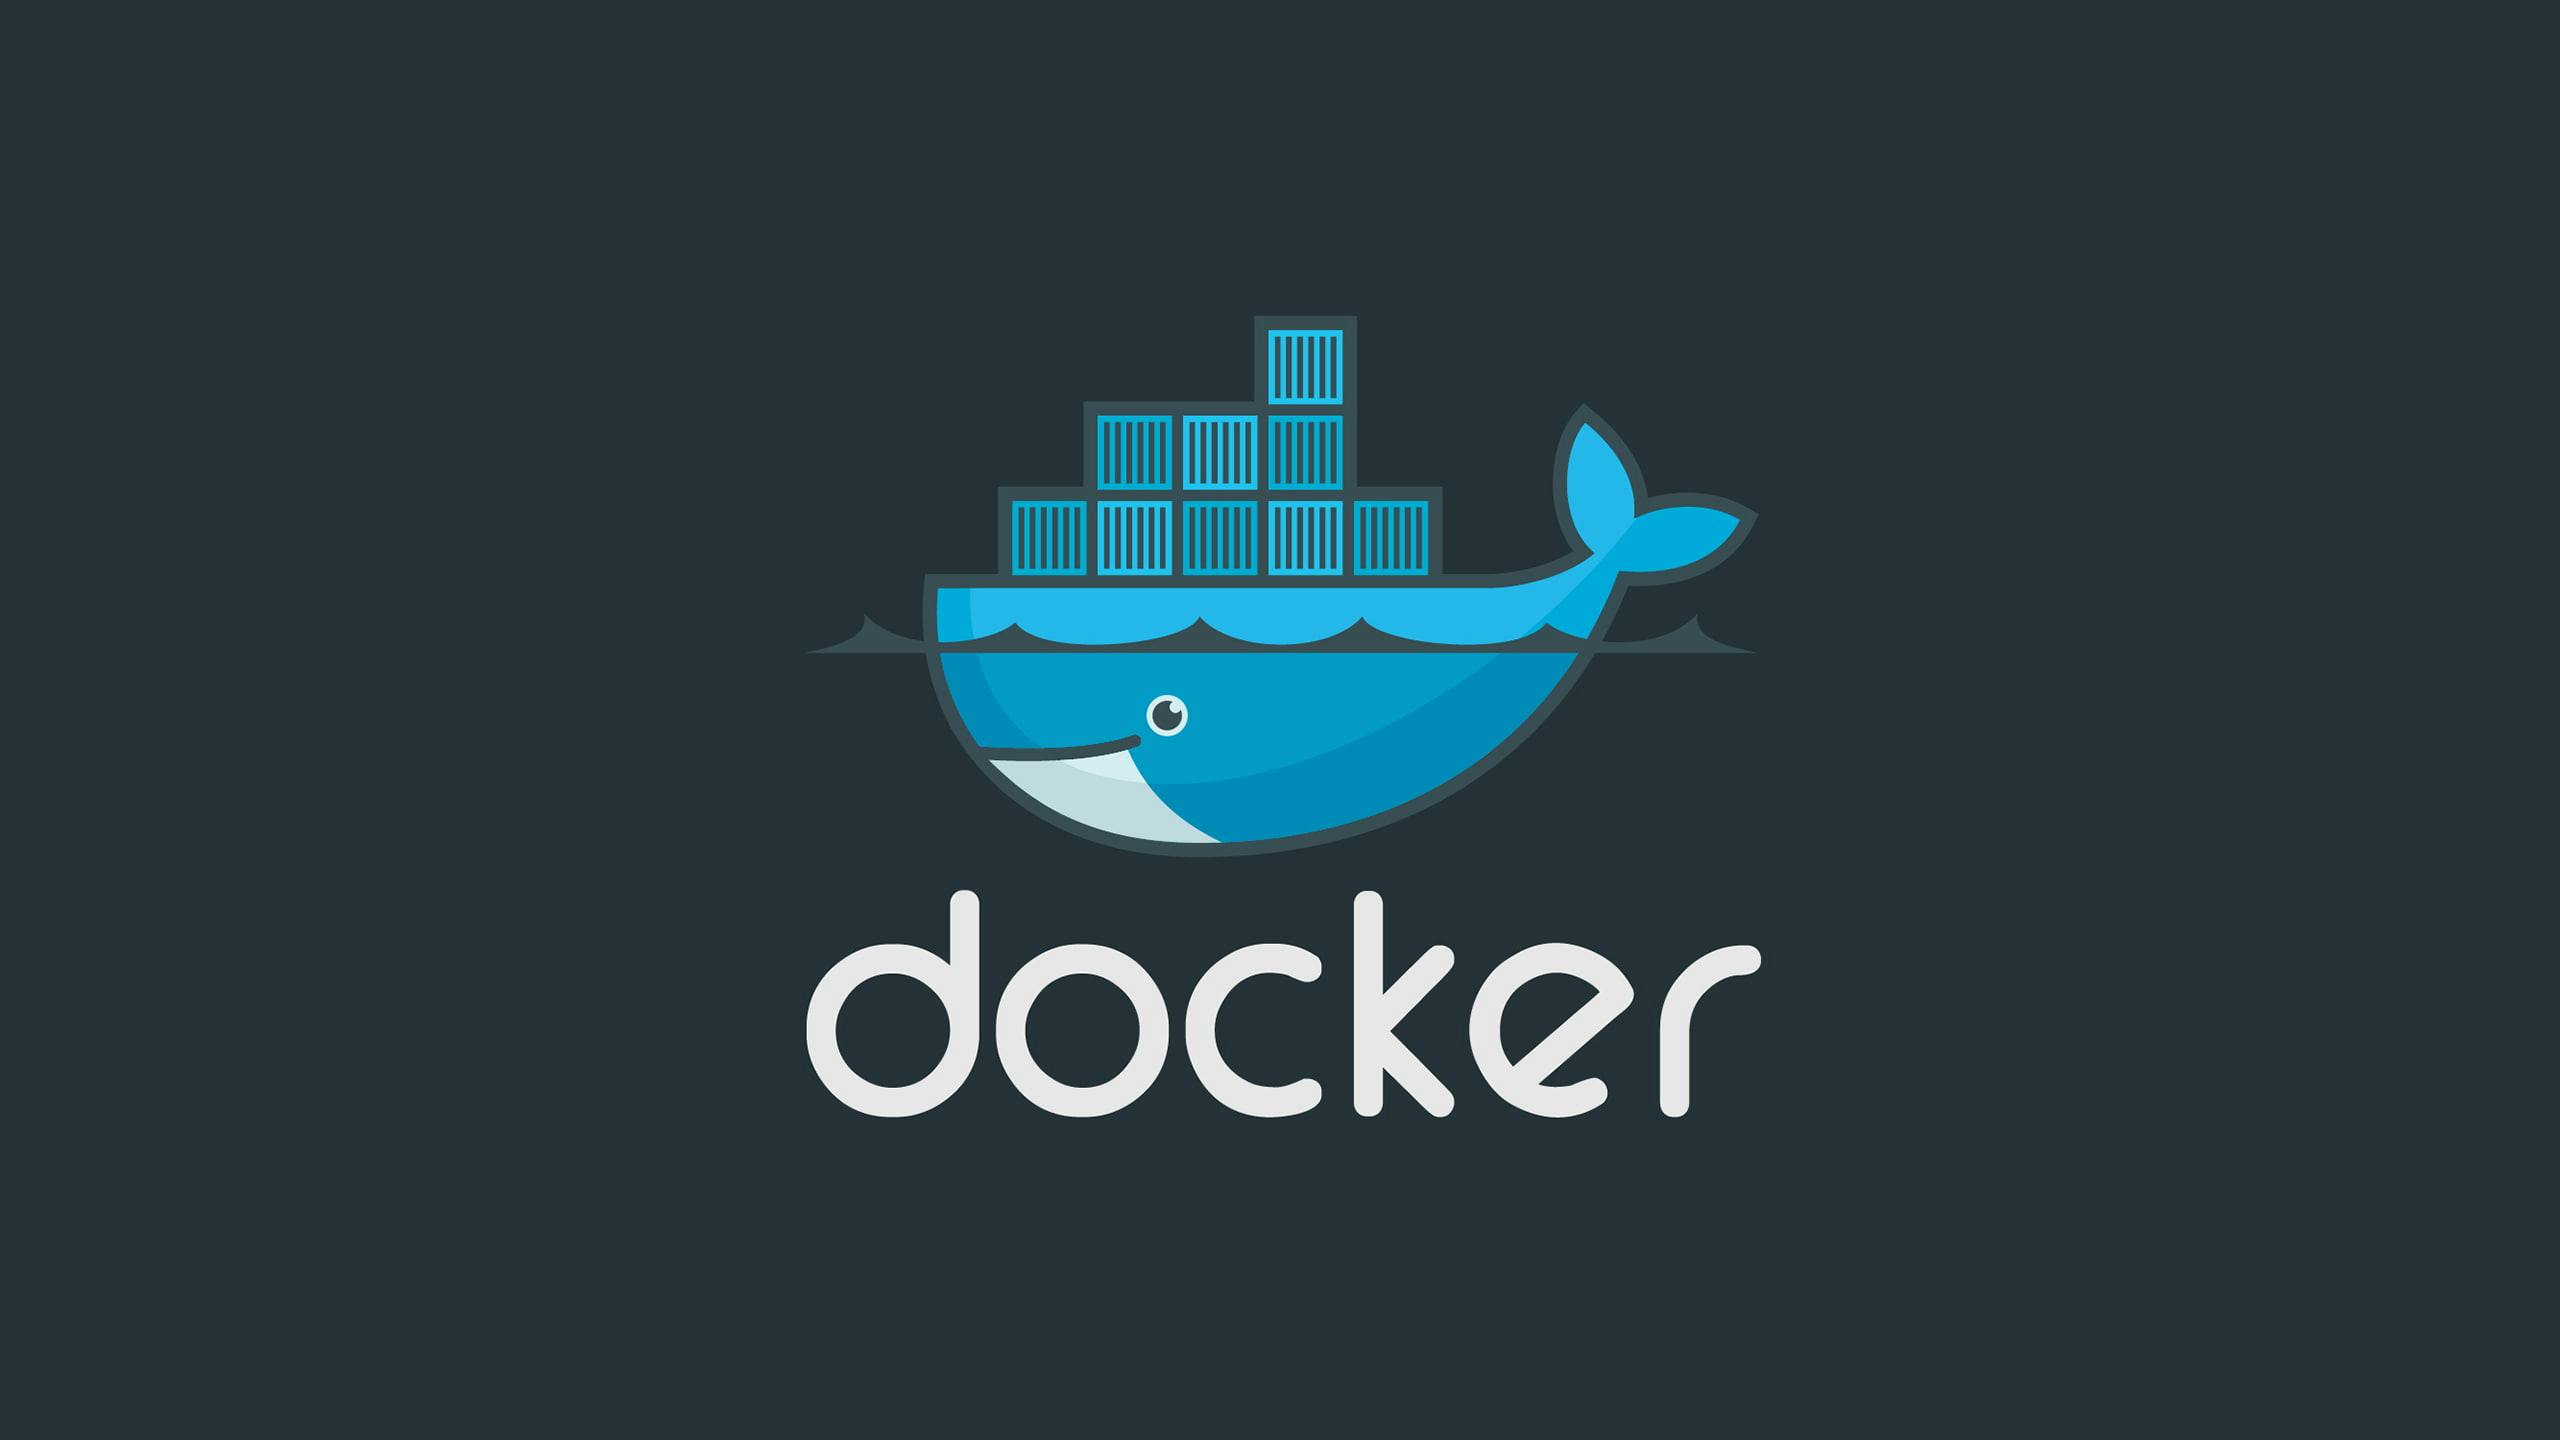 Cover Image for About Learning Docker